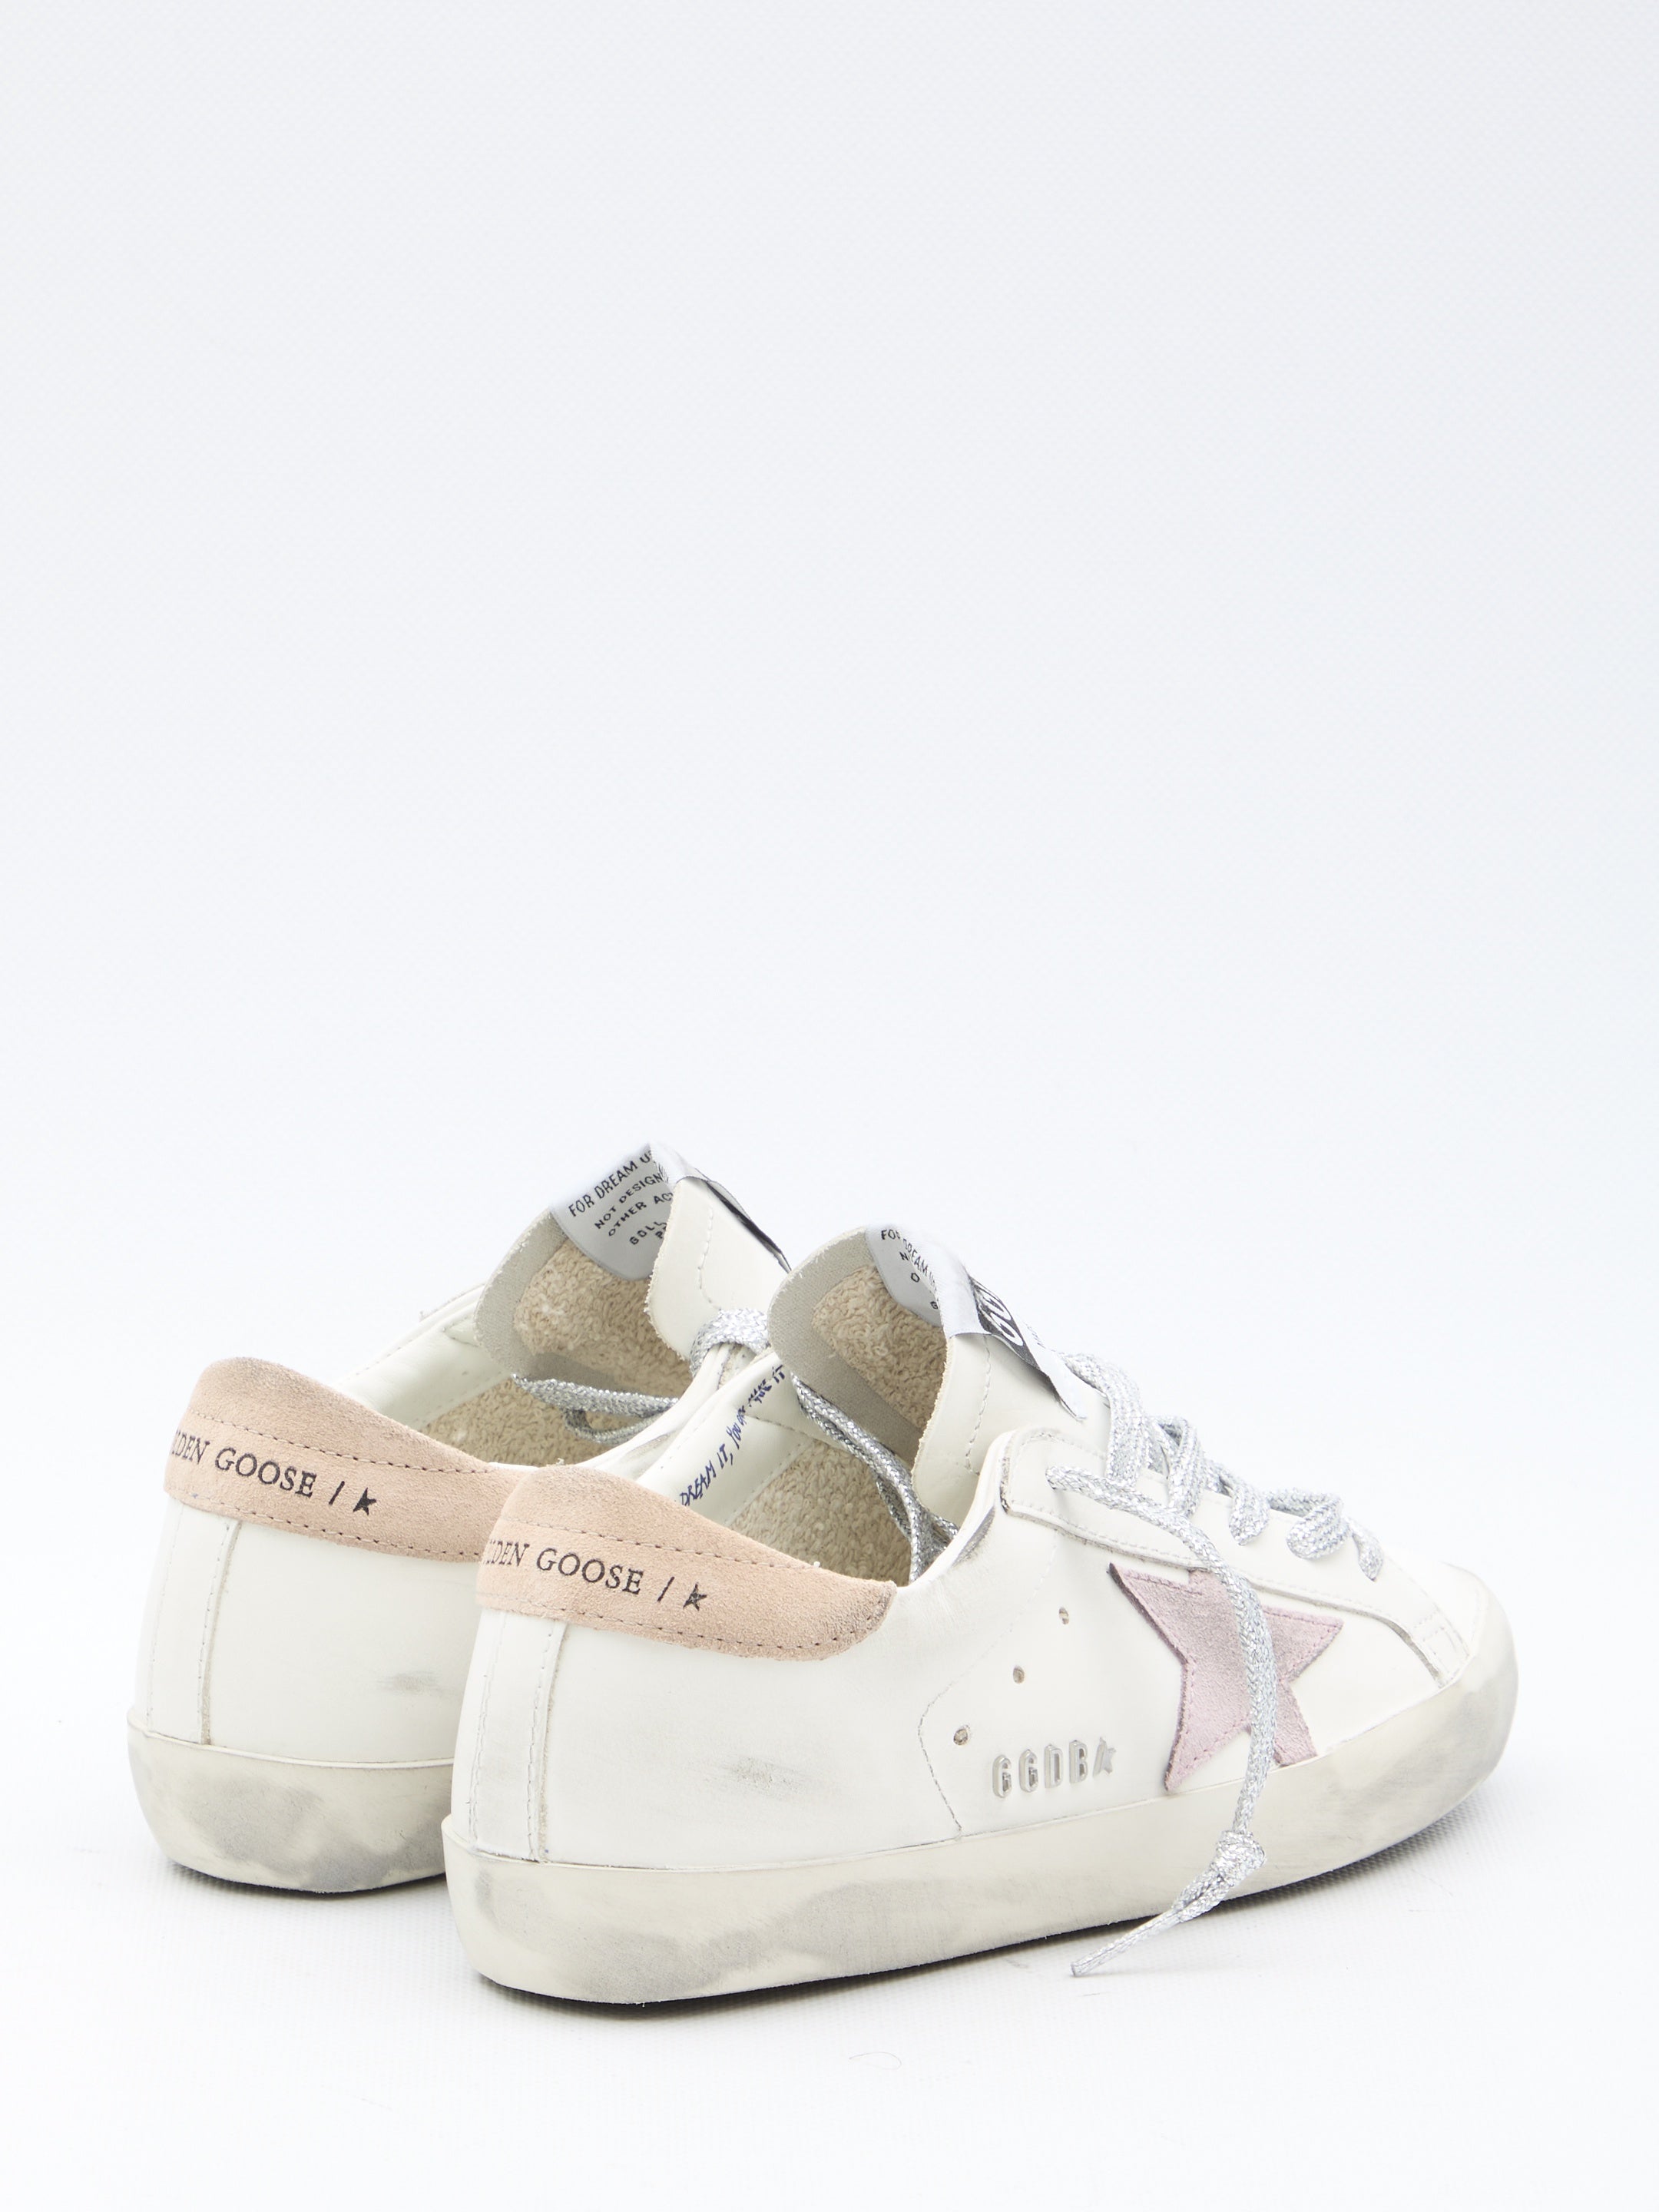 GOLDEN-GOOSE-OUTLET-SALE-Super-Star-sneakers-Sneakers-37-WHITE-ARCHIVE-COLLECTION-3.jpg